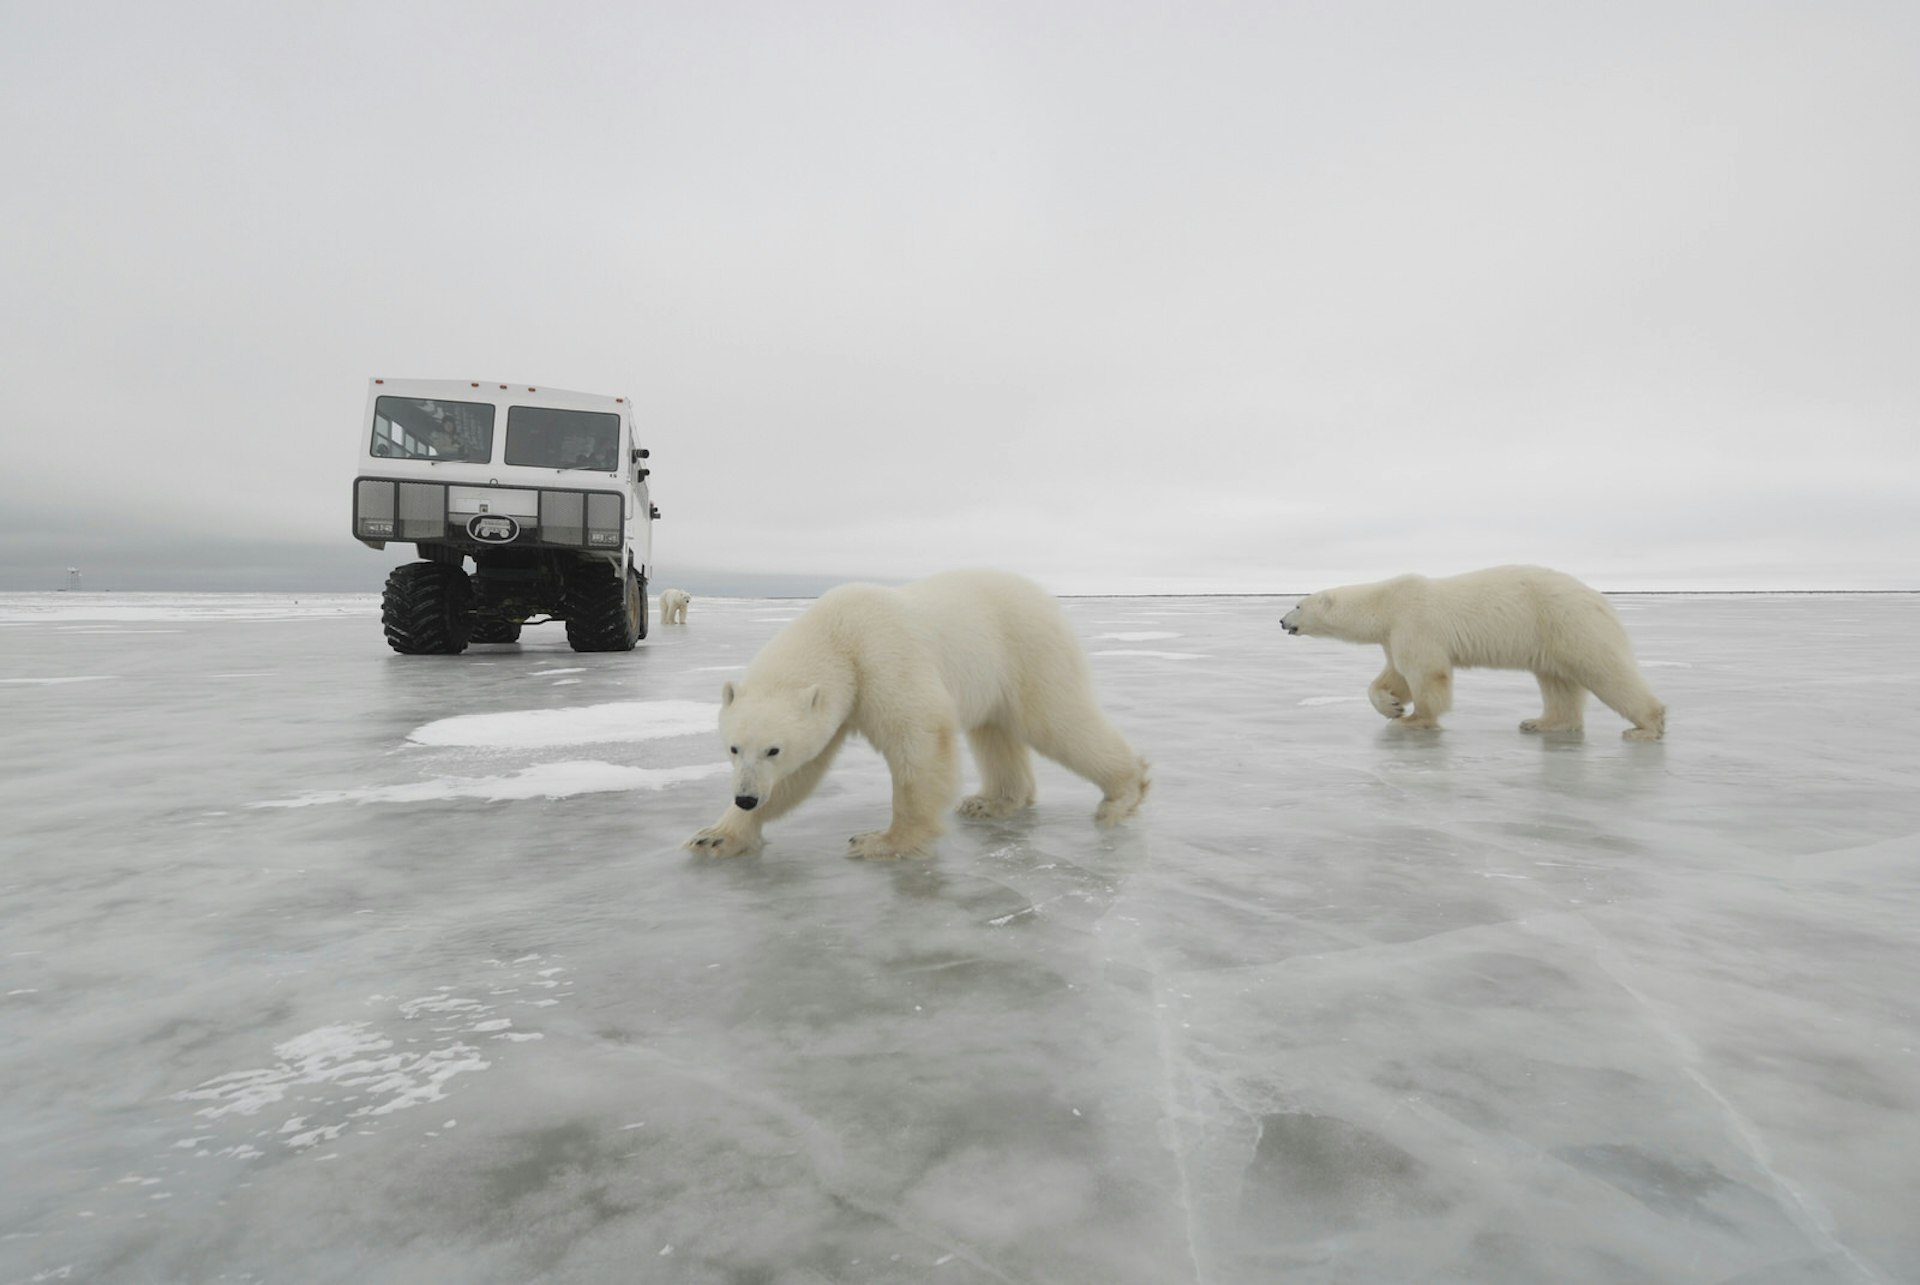 Polar bears in front of a specially designed tundra buggy near Churchill, Canada © Daniel J Cox / Getty Images